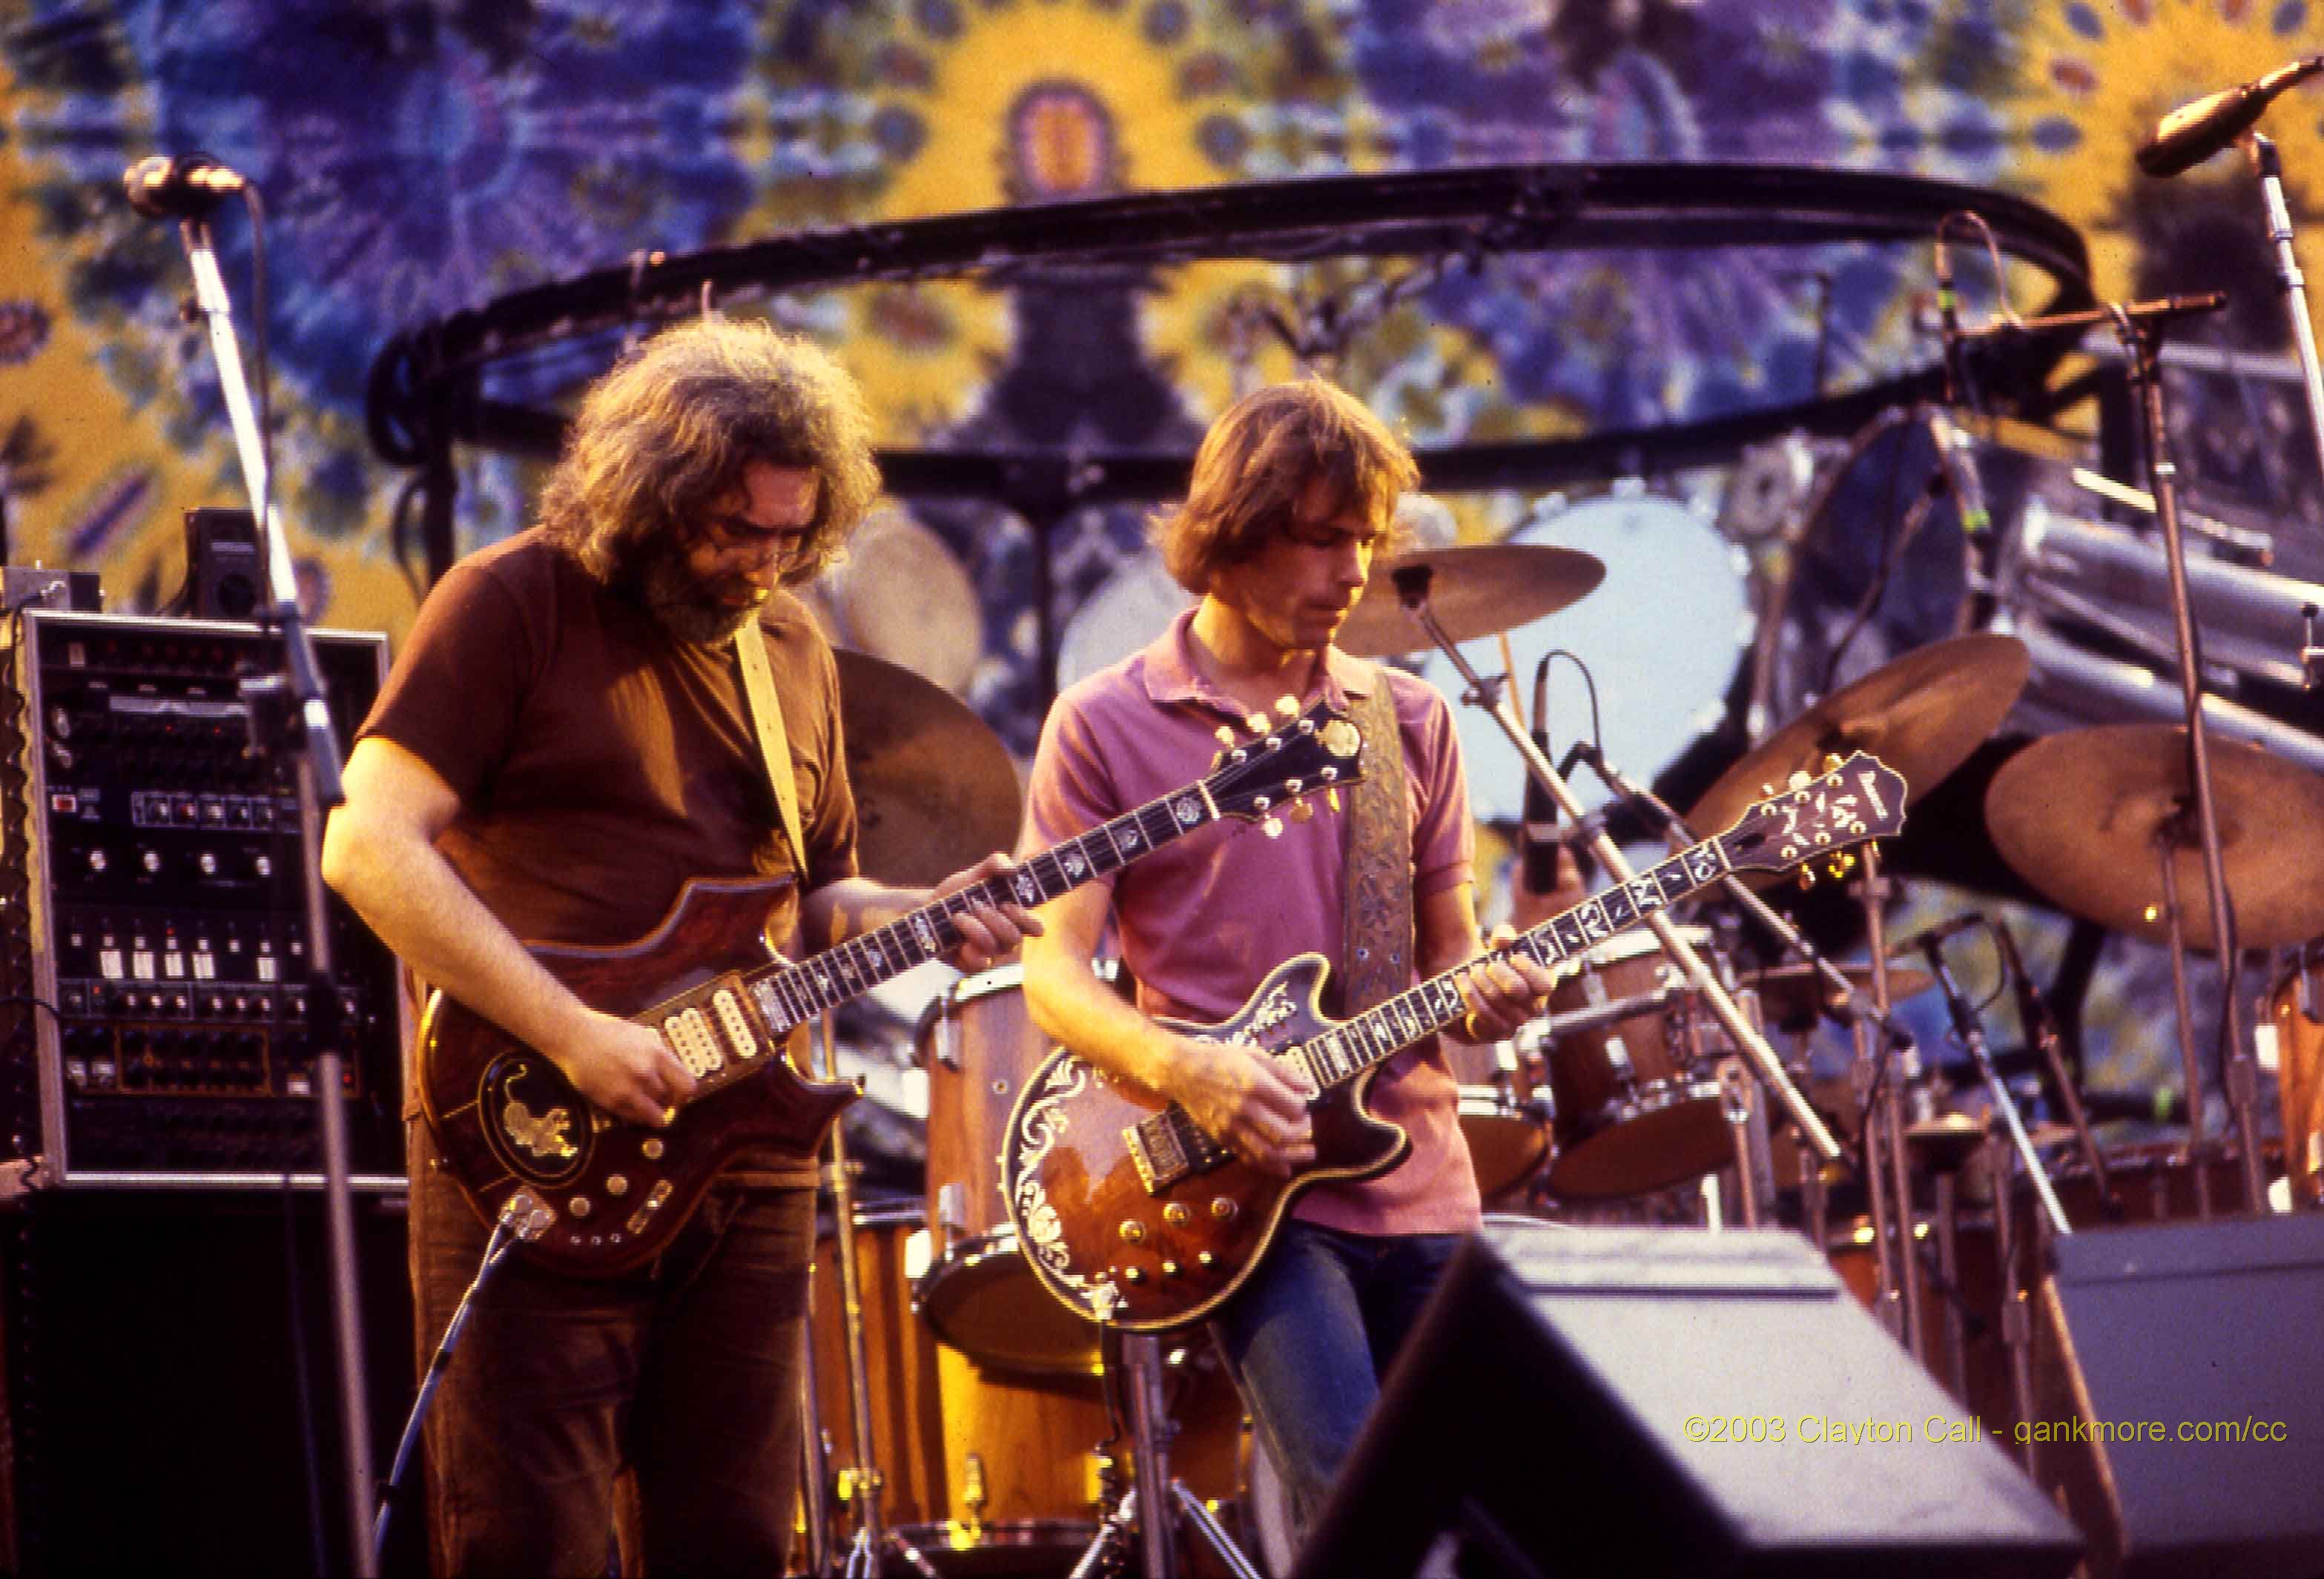 Grateful Dead playing live